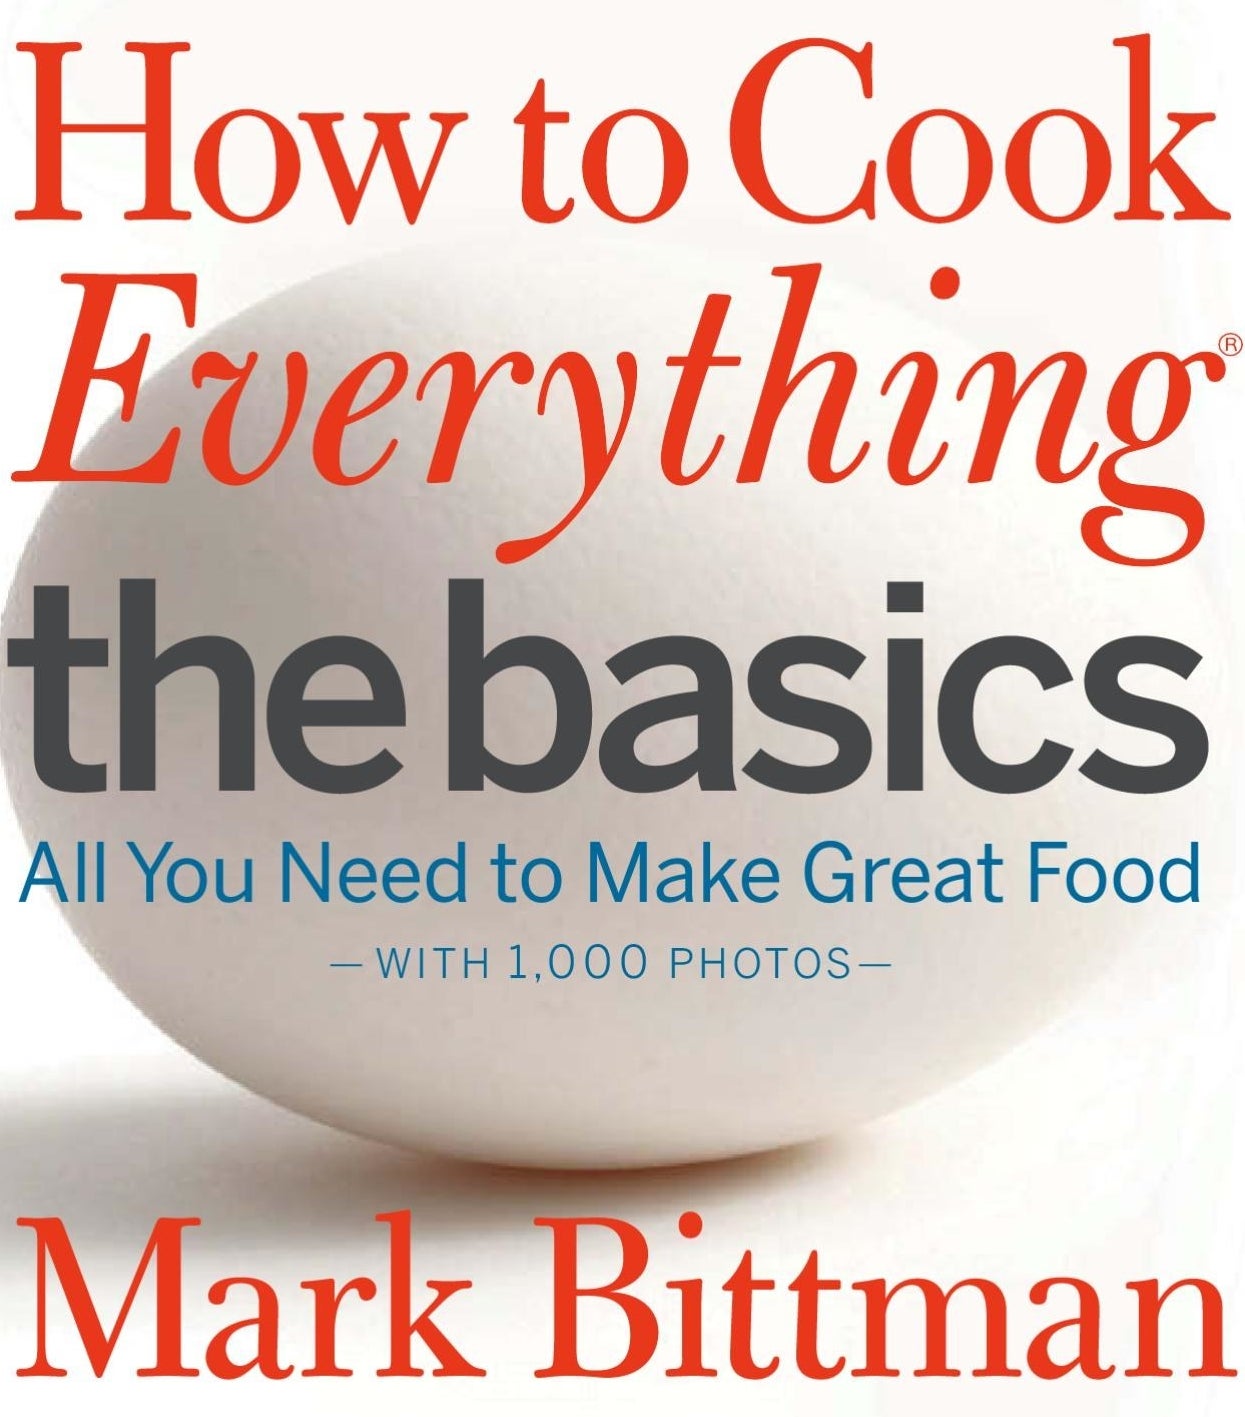 The cover of the book by Mark Bittman